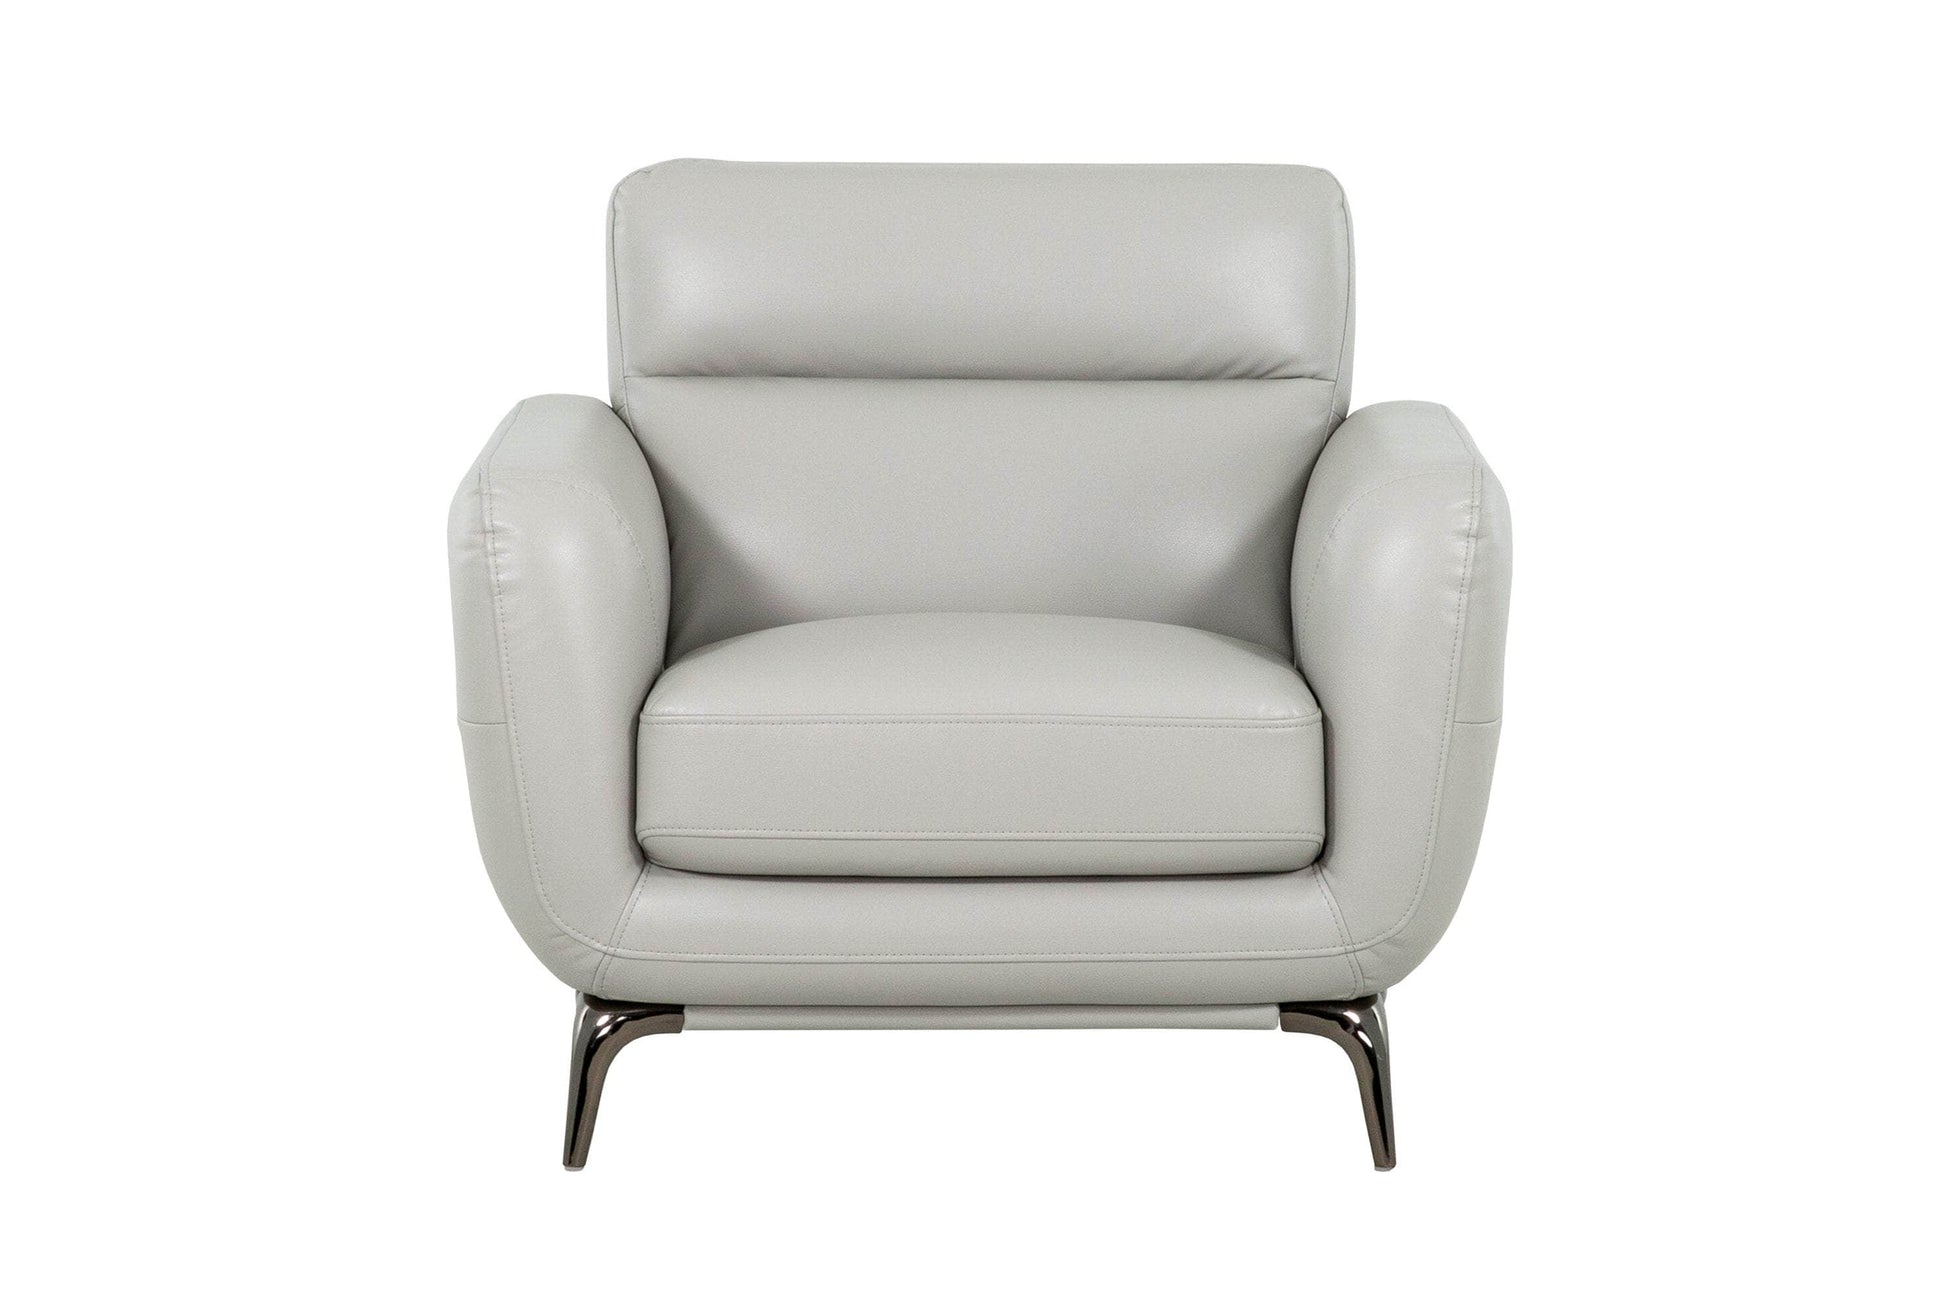 True Contemporary Chair Grey William Tufted Faux Leather Chair - Available in 2 Colours